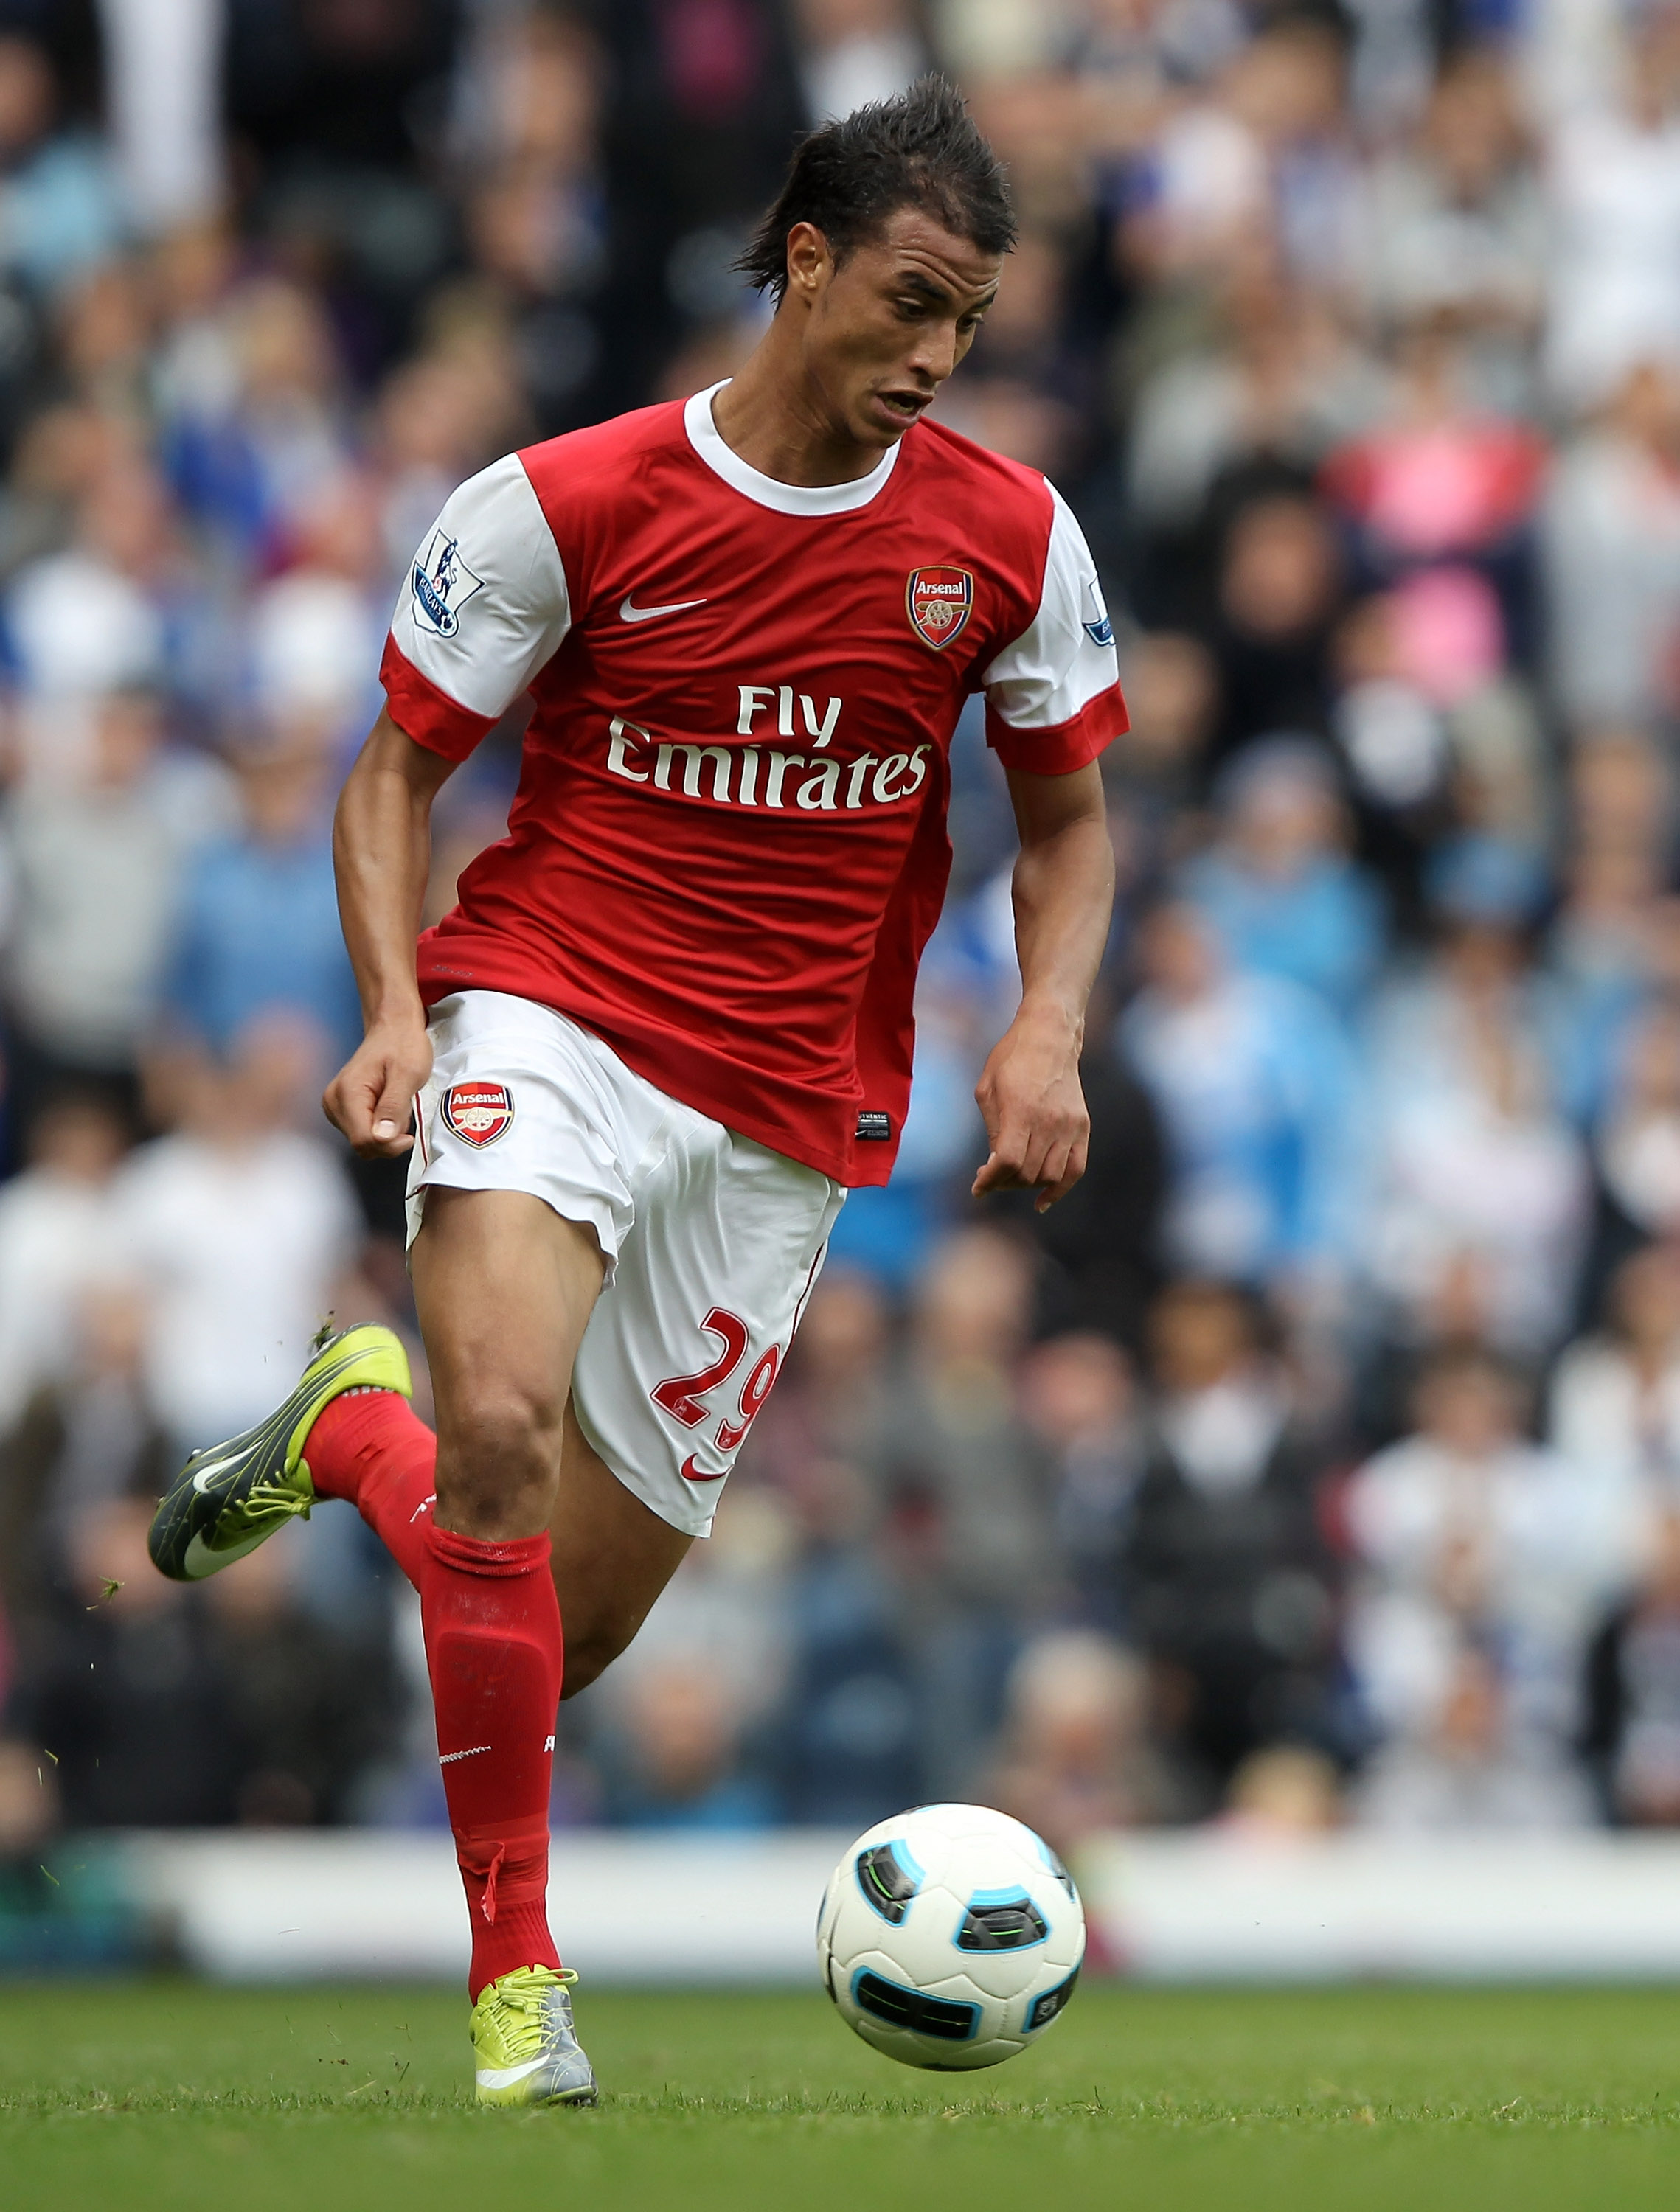 BLACKBURN, ENGLAND - AUGUST 28:  Maroune Chamakh of Arsenal in action during the Barclays Premier League match between Blackburn Rovers and Arsenal at Ewood Park on August 28, 2010 in Blackburn, England.  (Photo by Clive Brunskill/Getty Images)